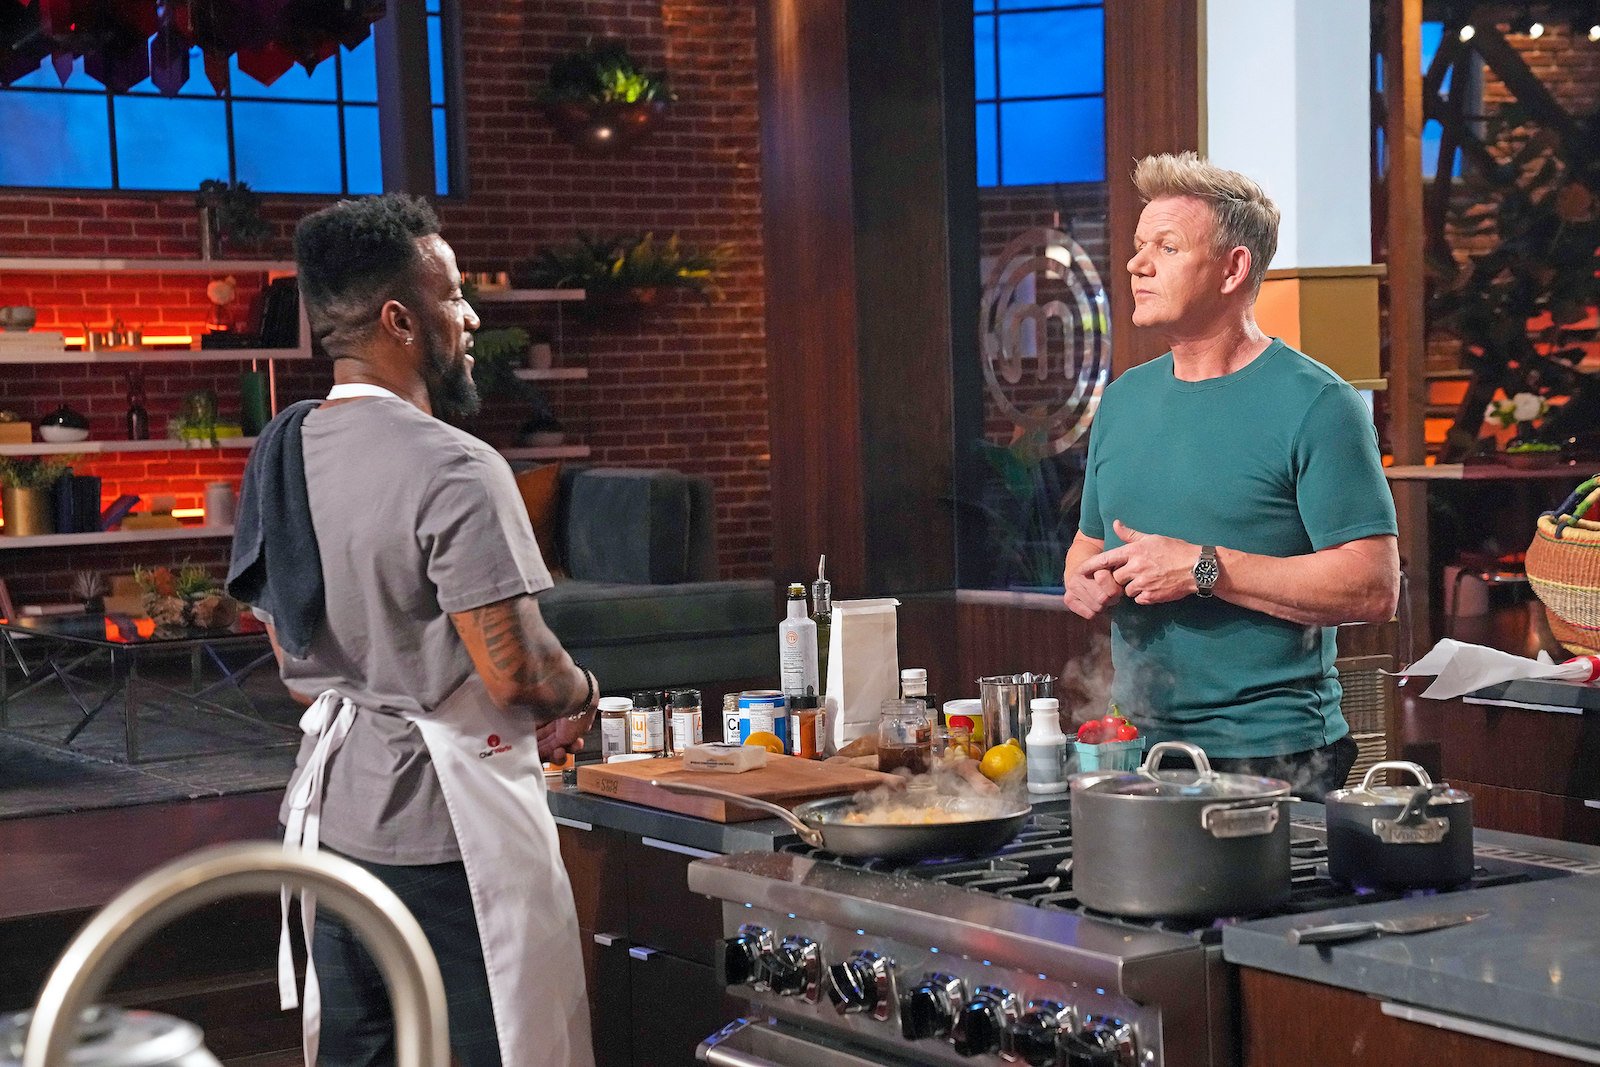 'MasterChef: Back to Win' cook Christian Green stands in front of chef Gordon Ramsay